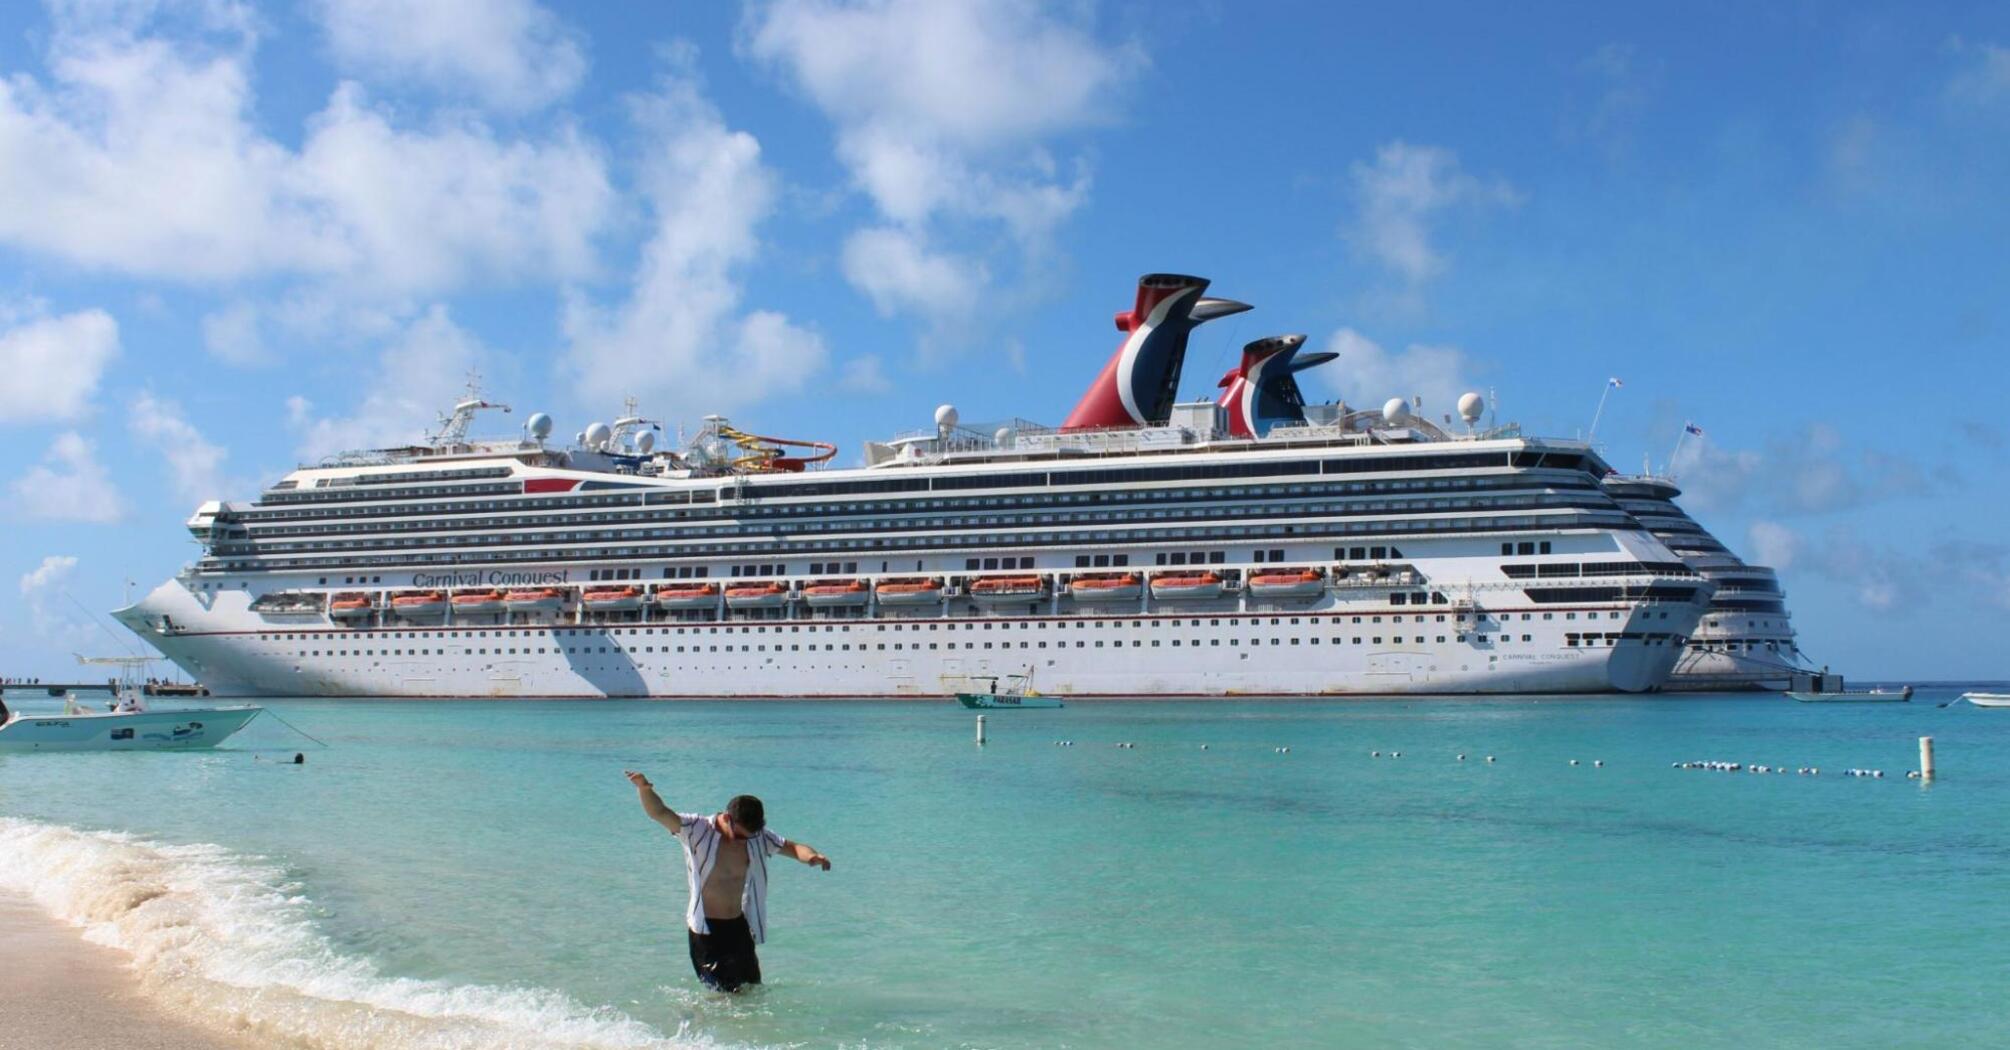 Man on the beach in front of a cruise ship at sea